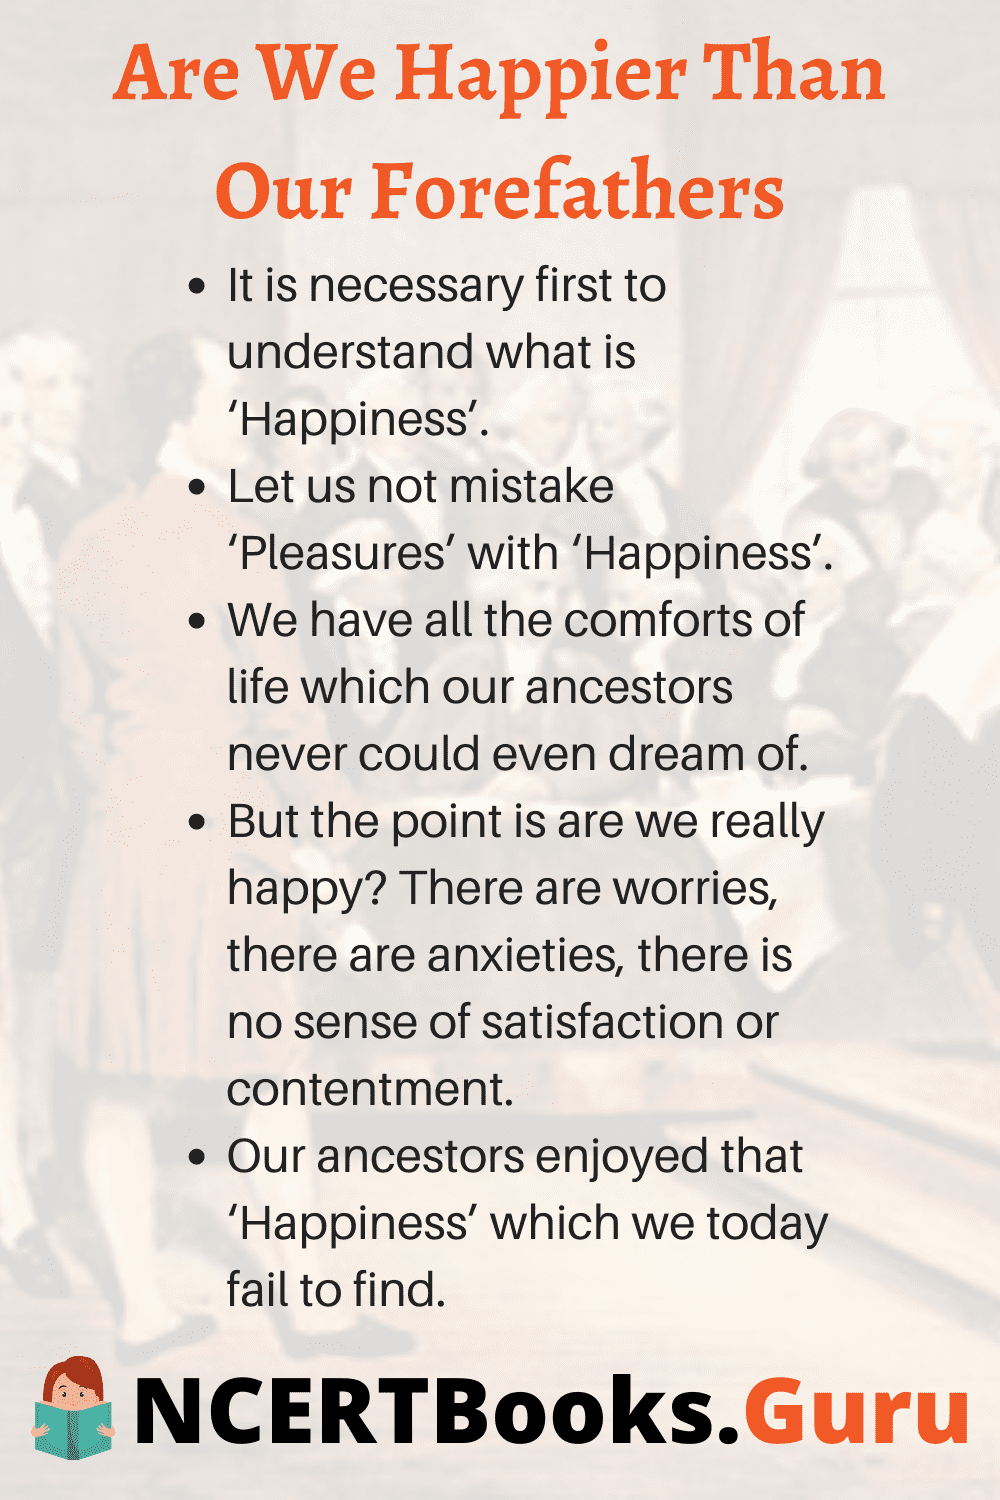 Essay on Are we happier than our forefathers